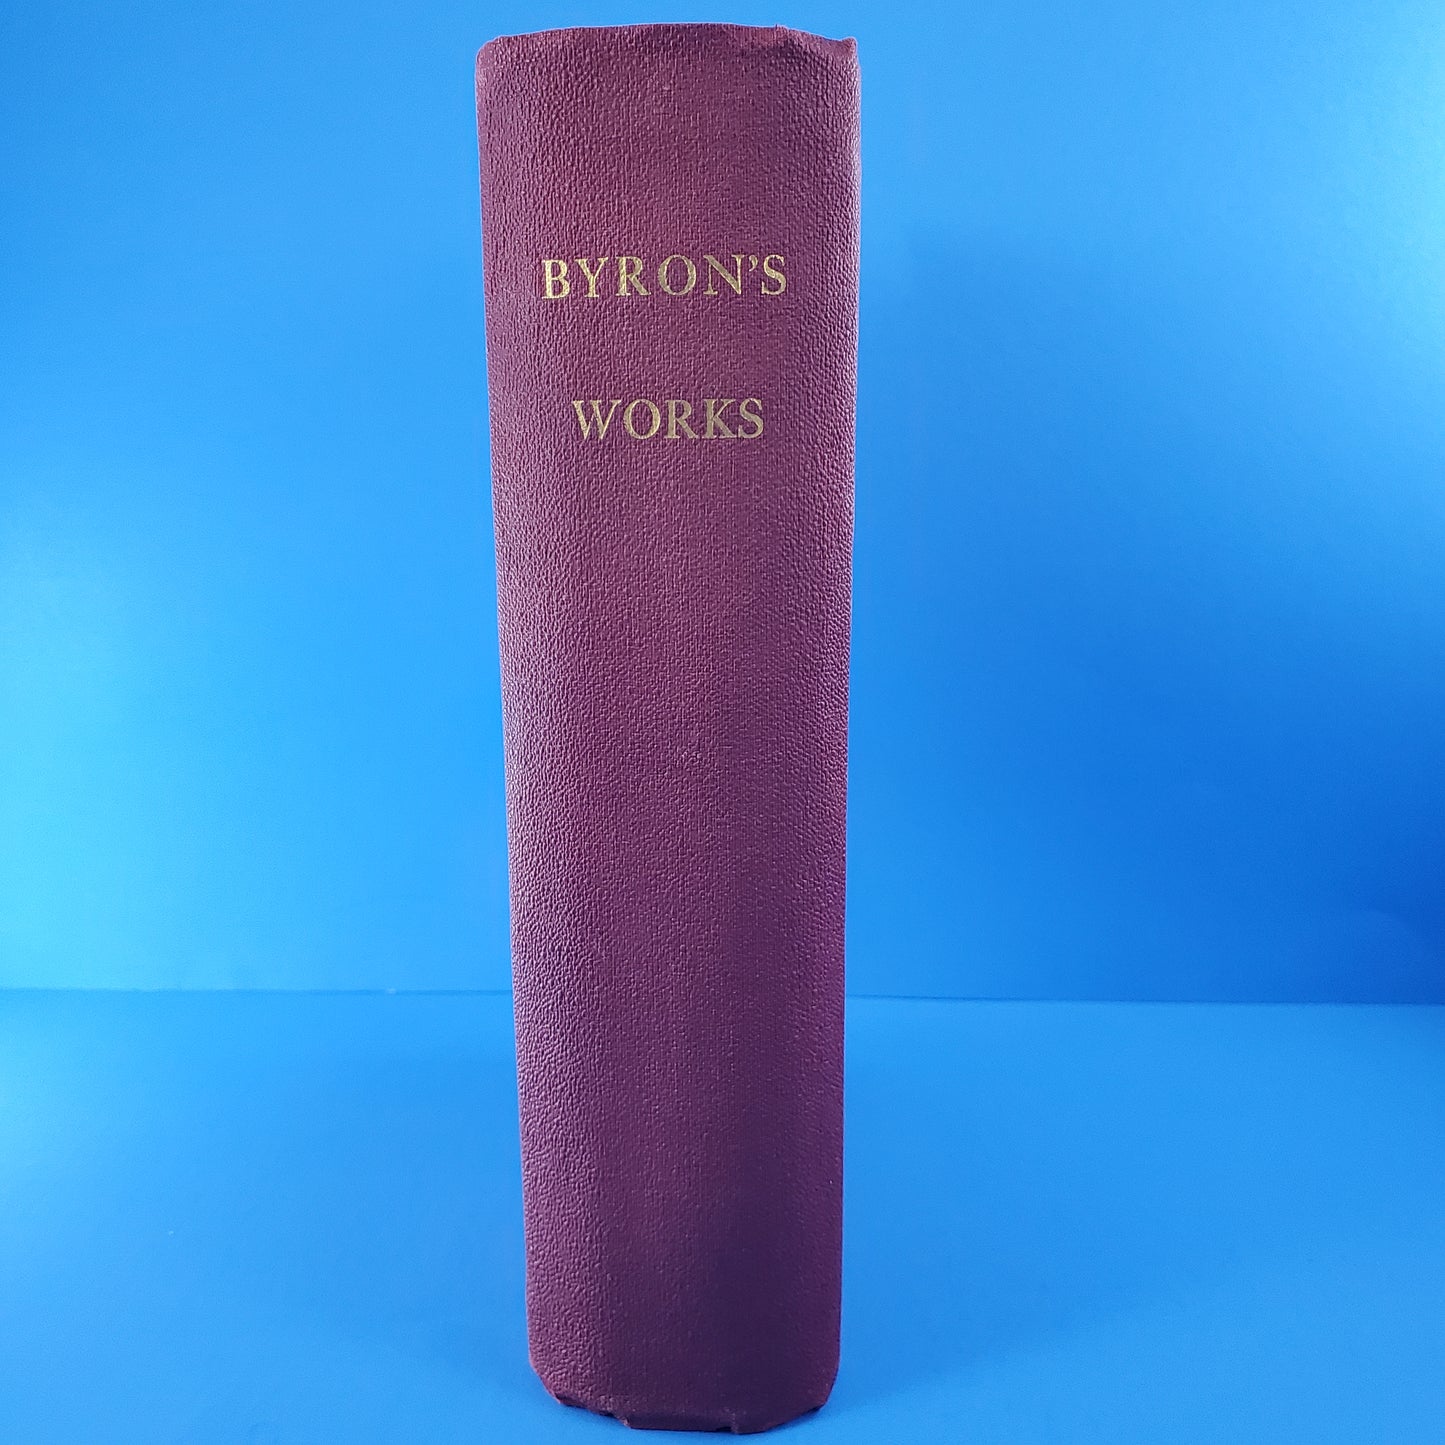 The Poetical Works of Lord Byron: Complete in One Volume